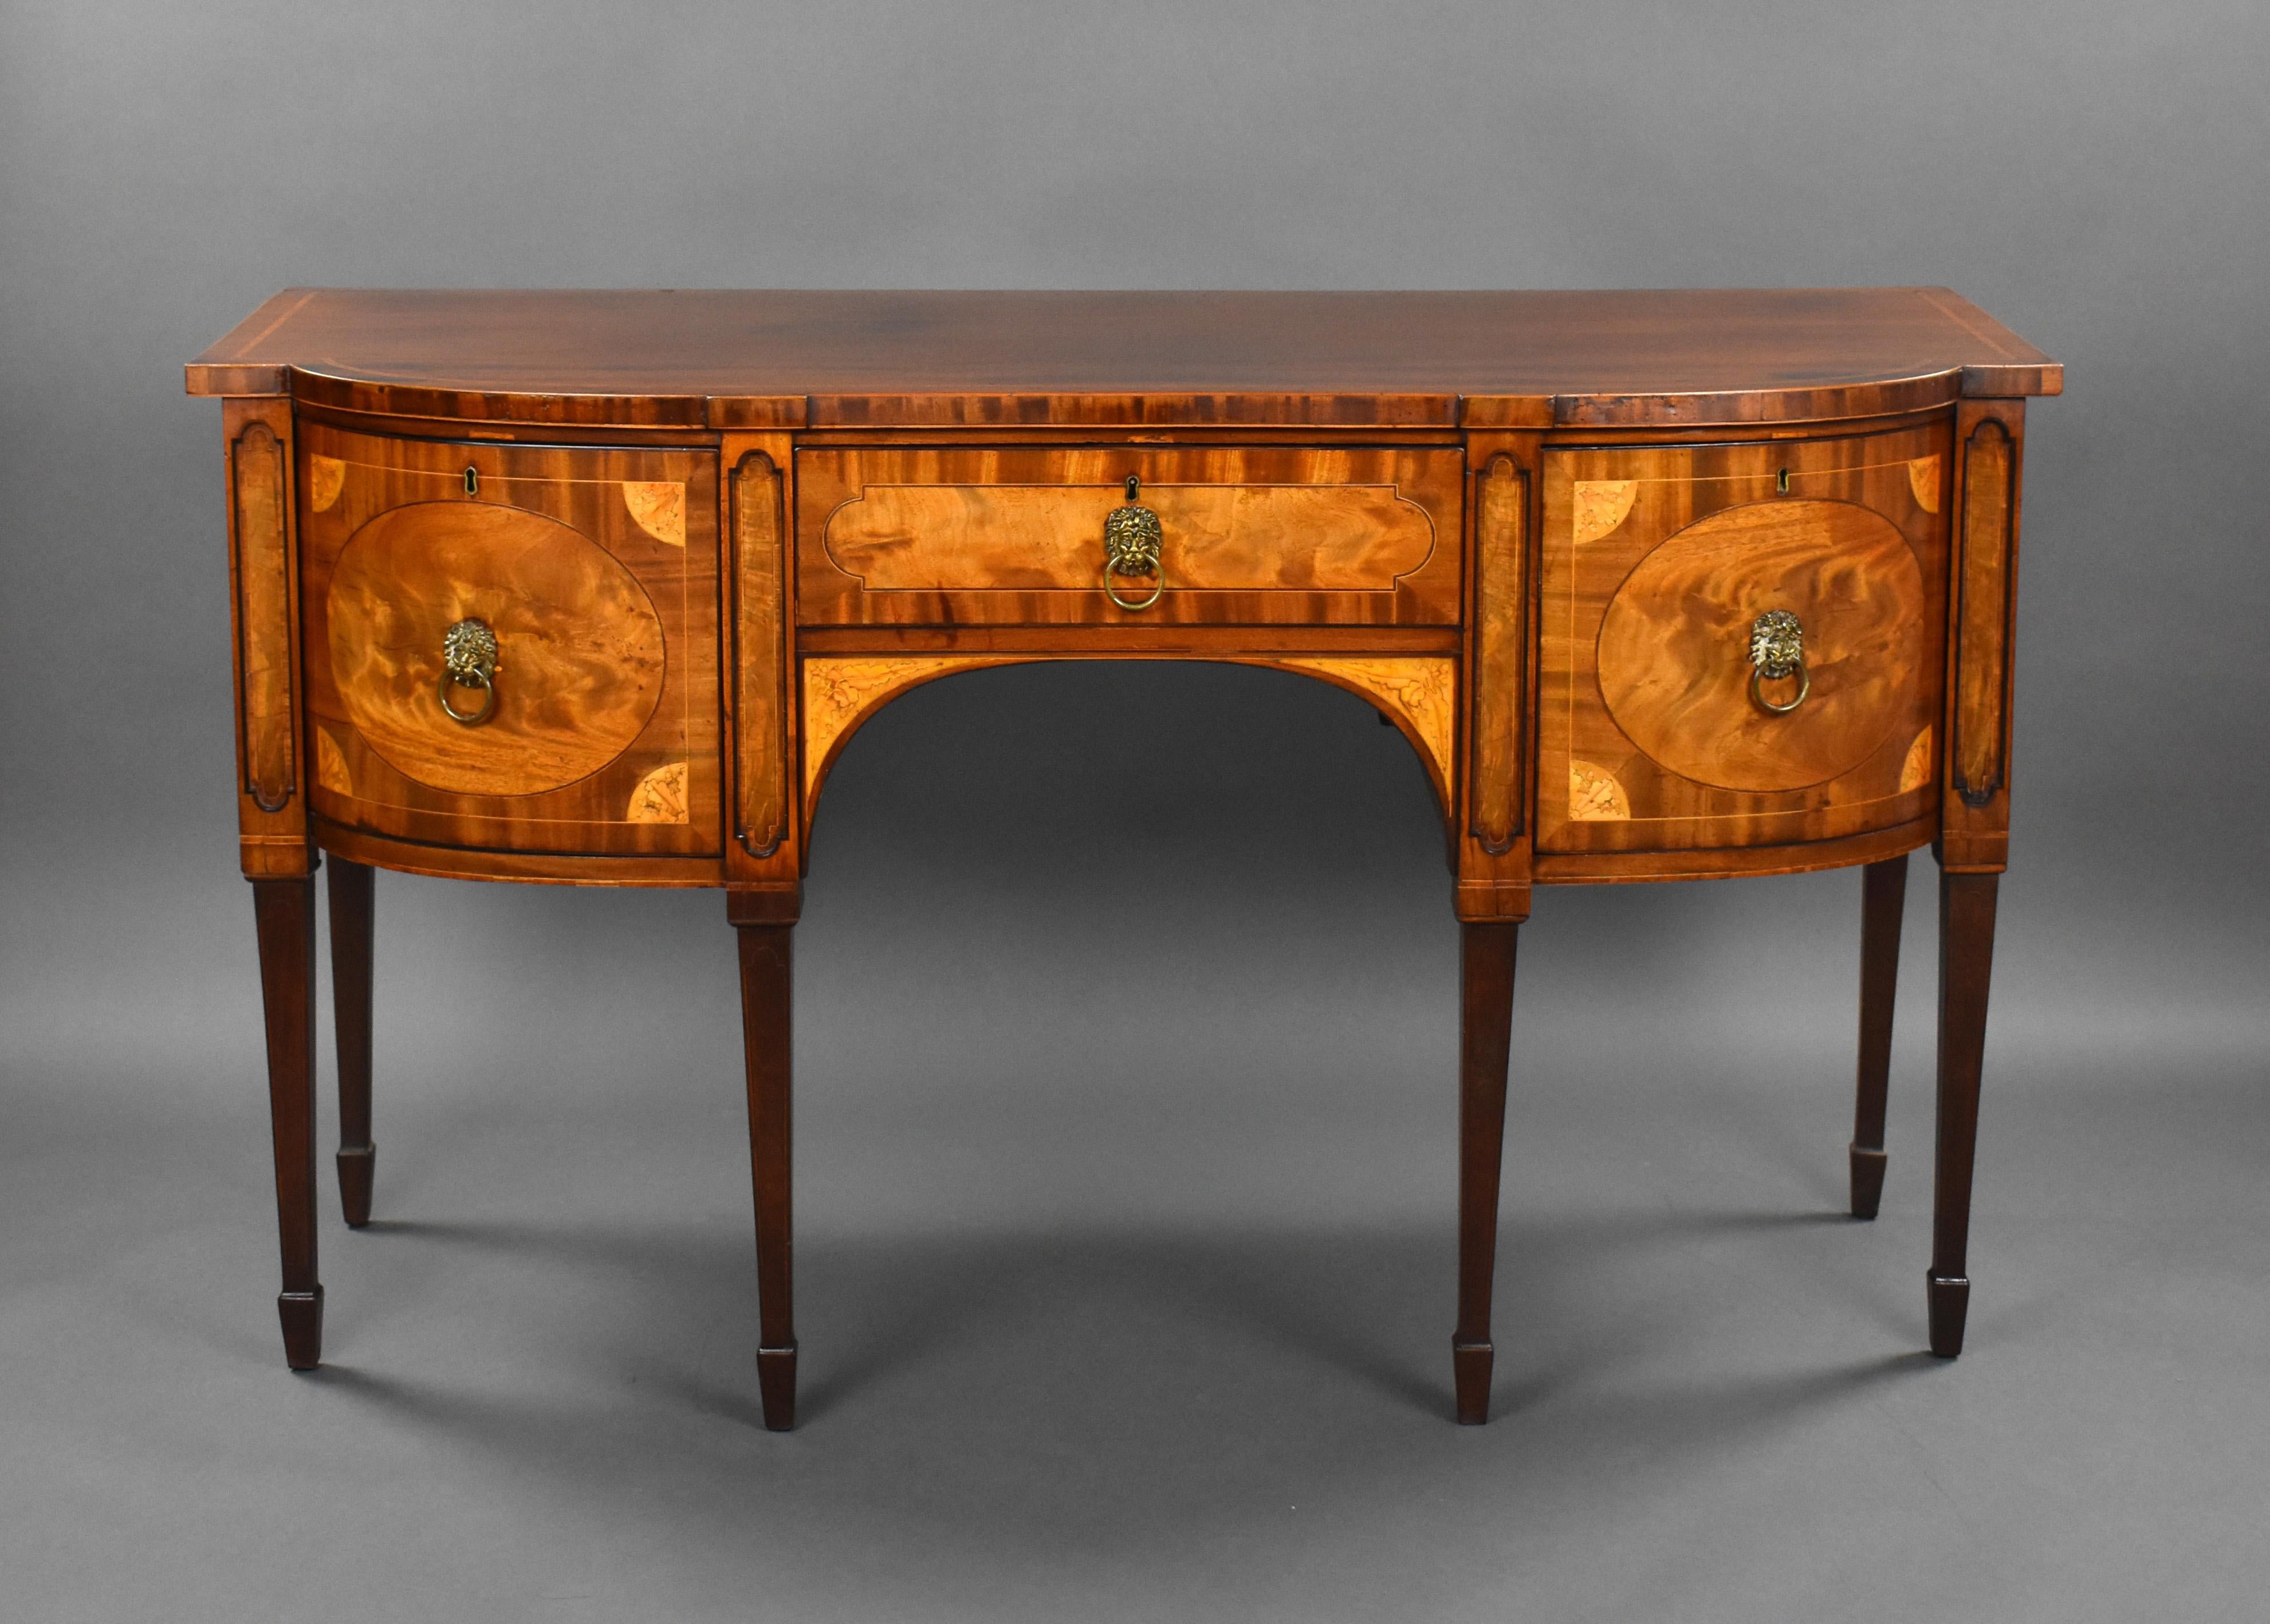 For sale is a good quality George III mahogany and satinwood cross banded bow front sideboard, circa 1790, in the manner of Thomas Sheraton, having a shaped slightly over sailing top above a single frieze drawers, one fitted with a celarette